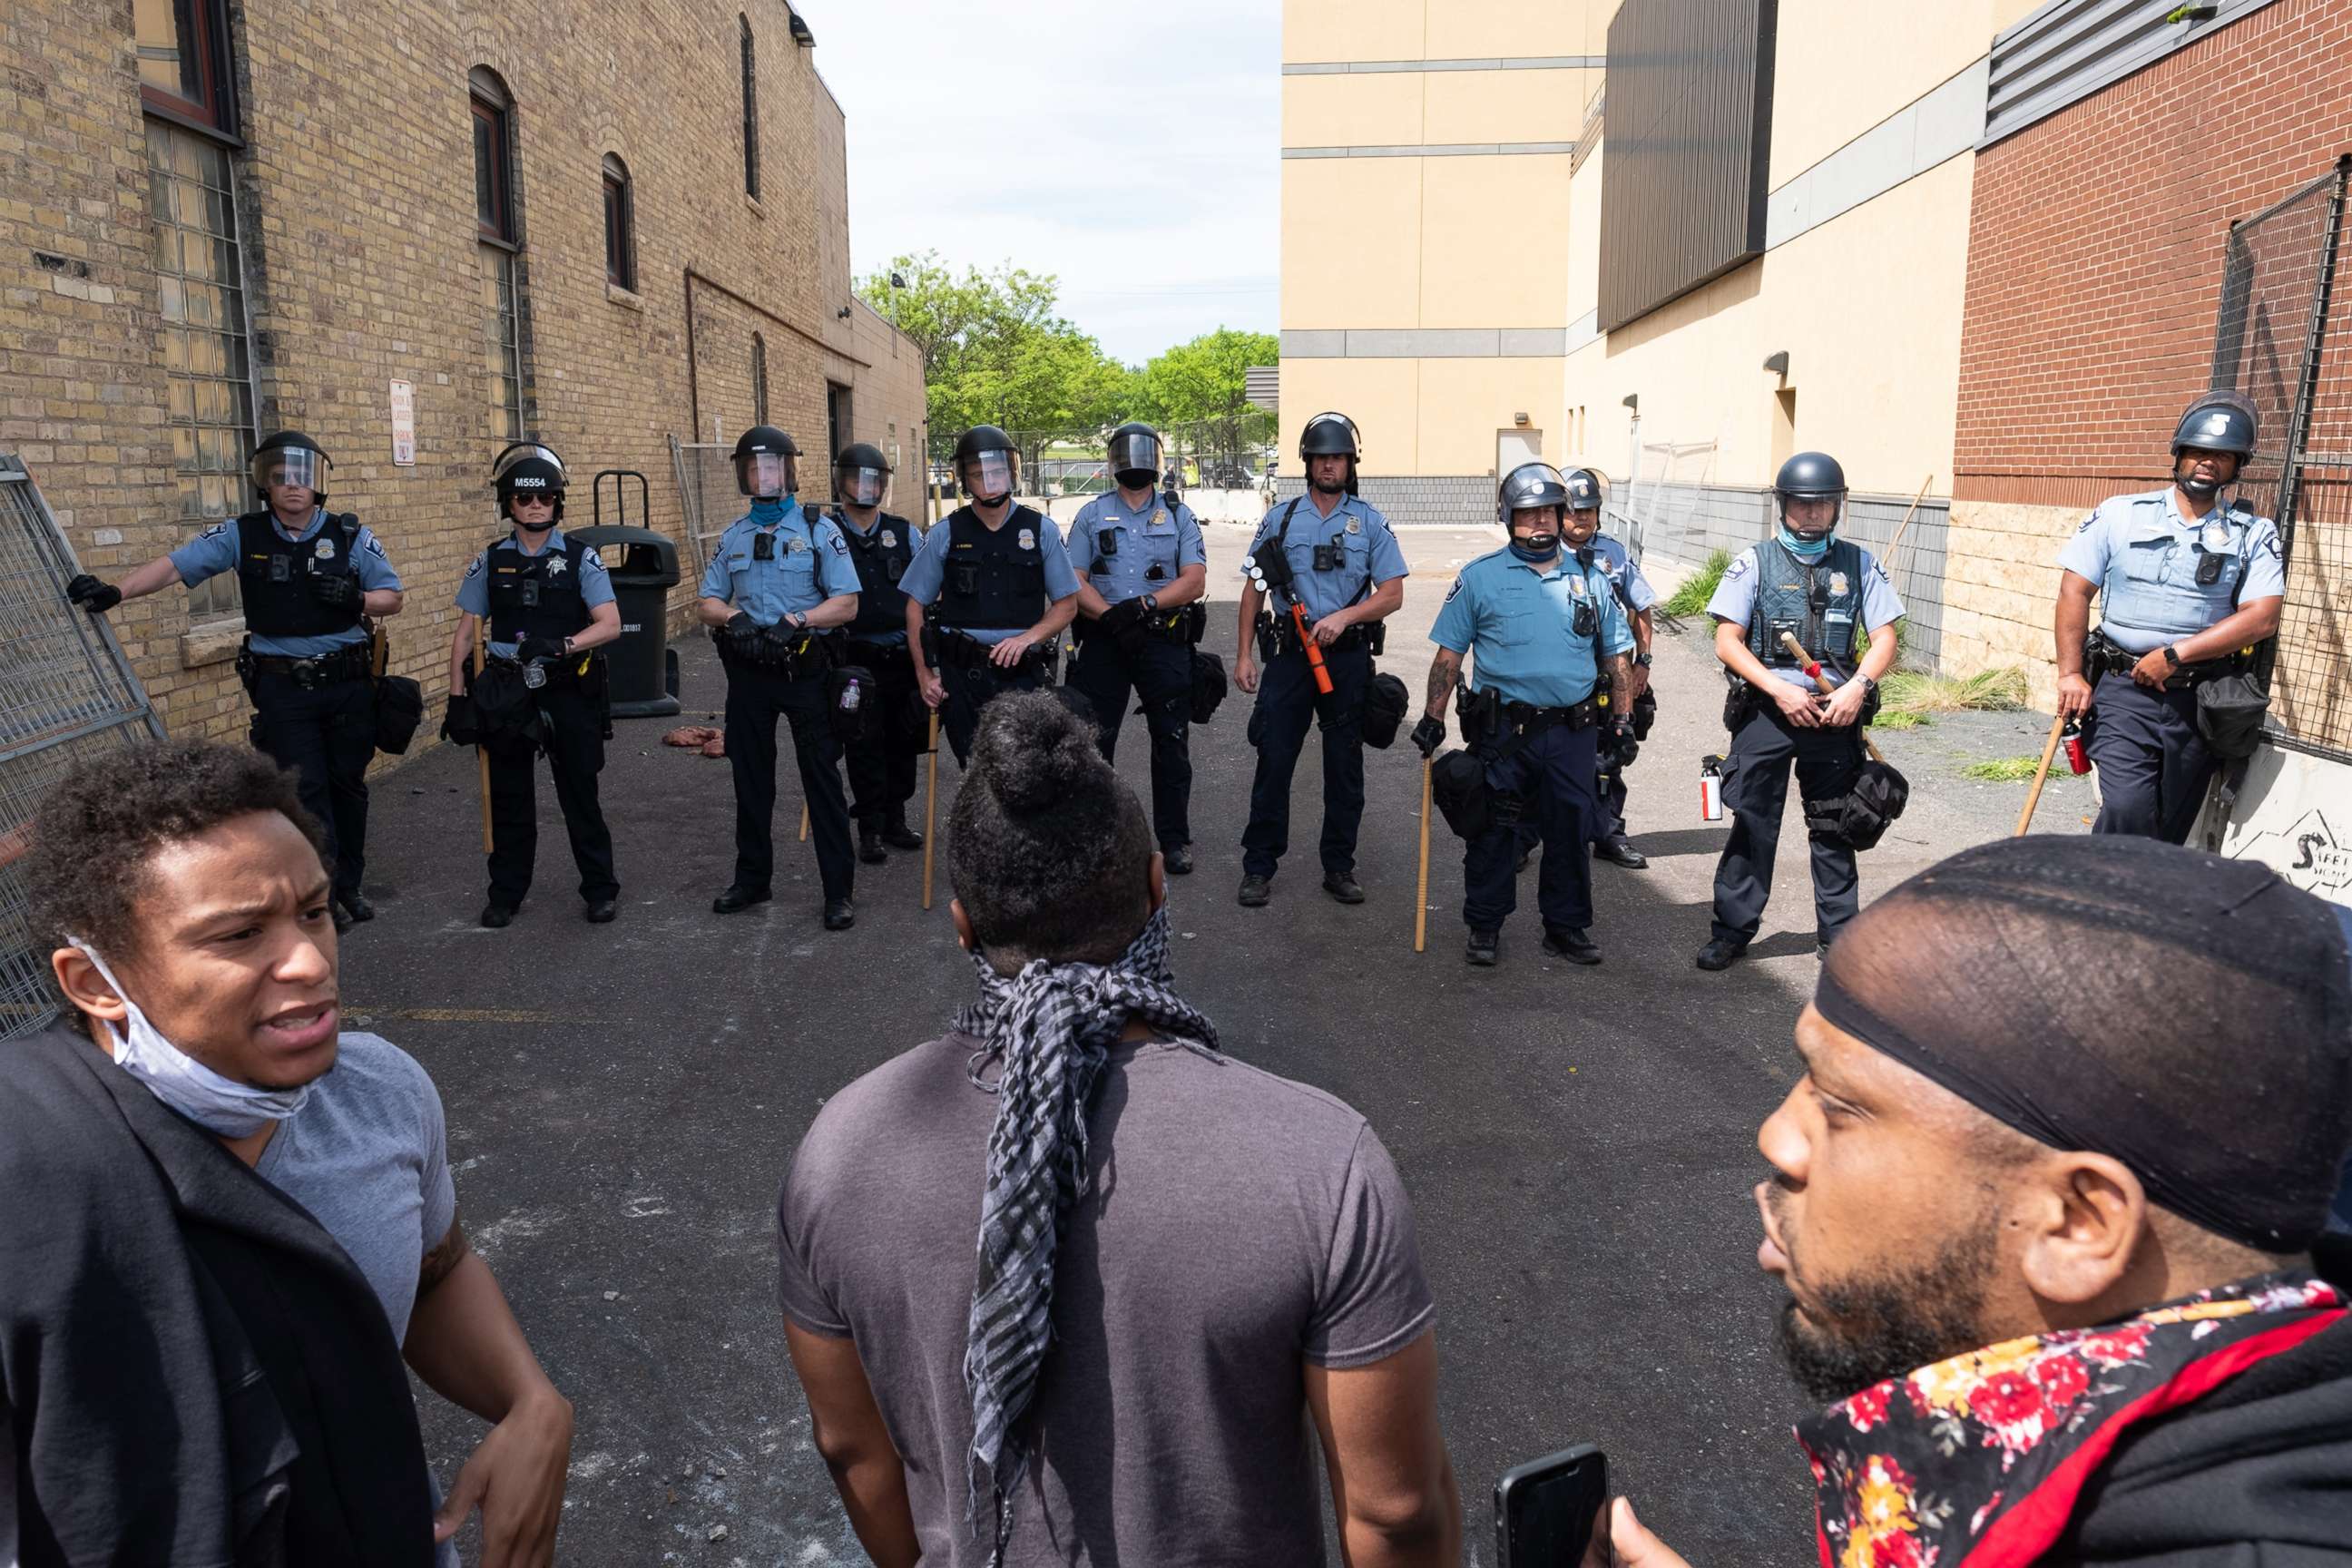 PHOTO: Protesters and police have a standoff behind the 3rd Precinct during a demonstration to call for justice for George Floyd, a black man who died while in police custody in Minneapolis, May 28, 2020.